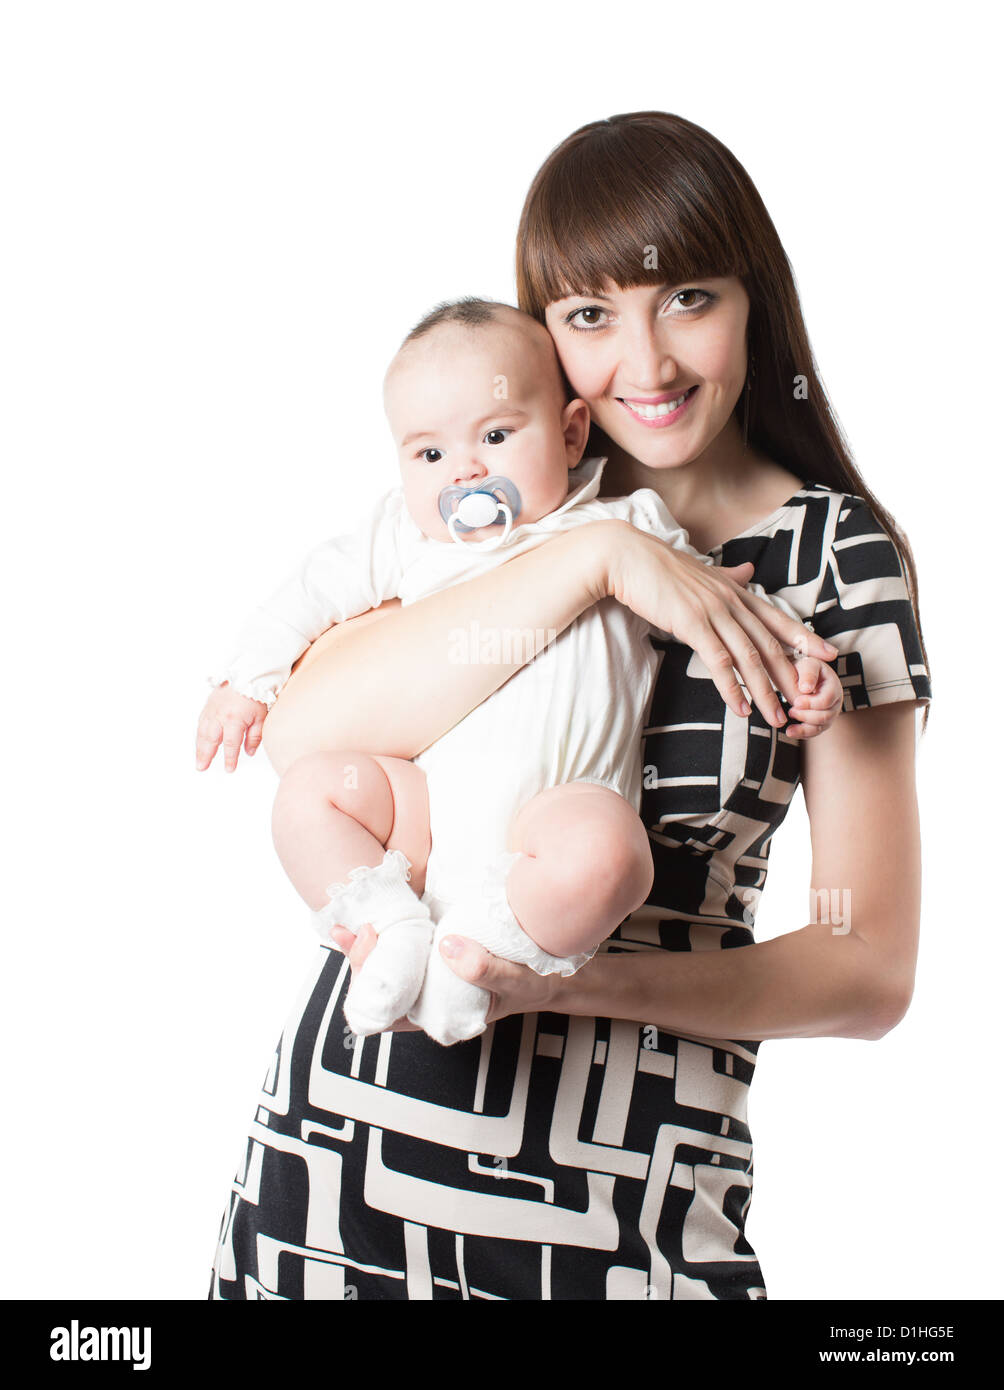 Happy mom and baby girl hugging on isolated white background Stock Photo